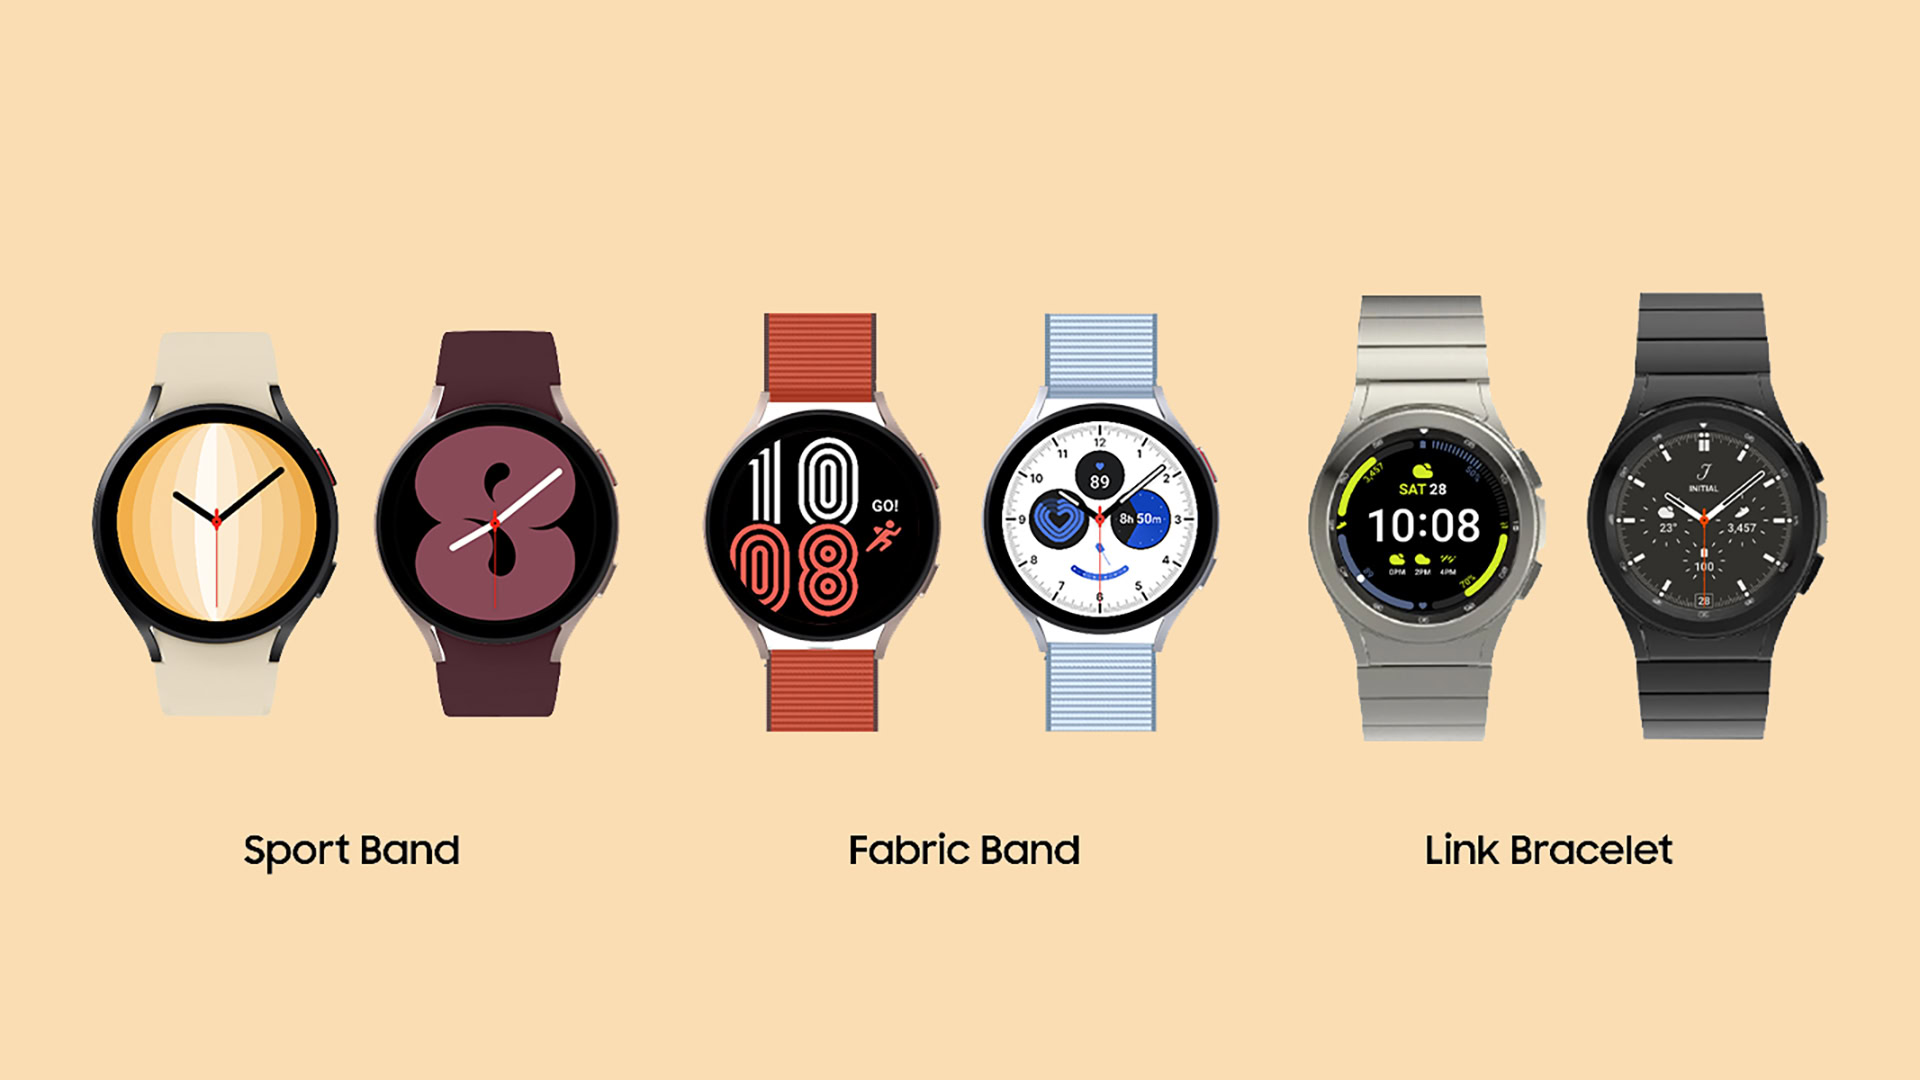 New Samsung Galaxy Watch 4 straps, faces are here - Android Authority